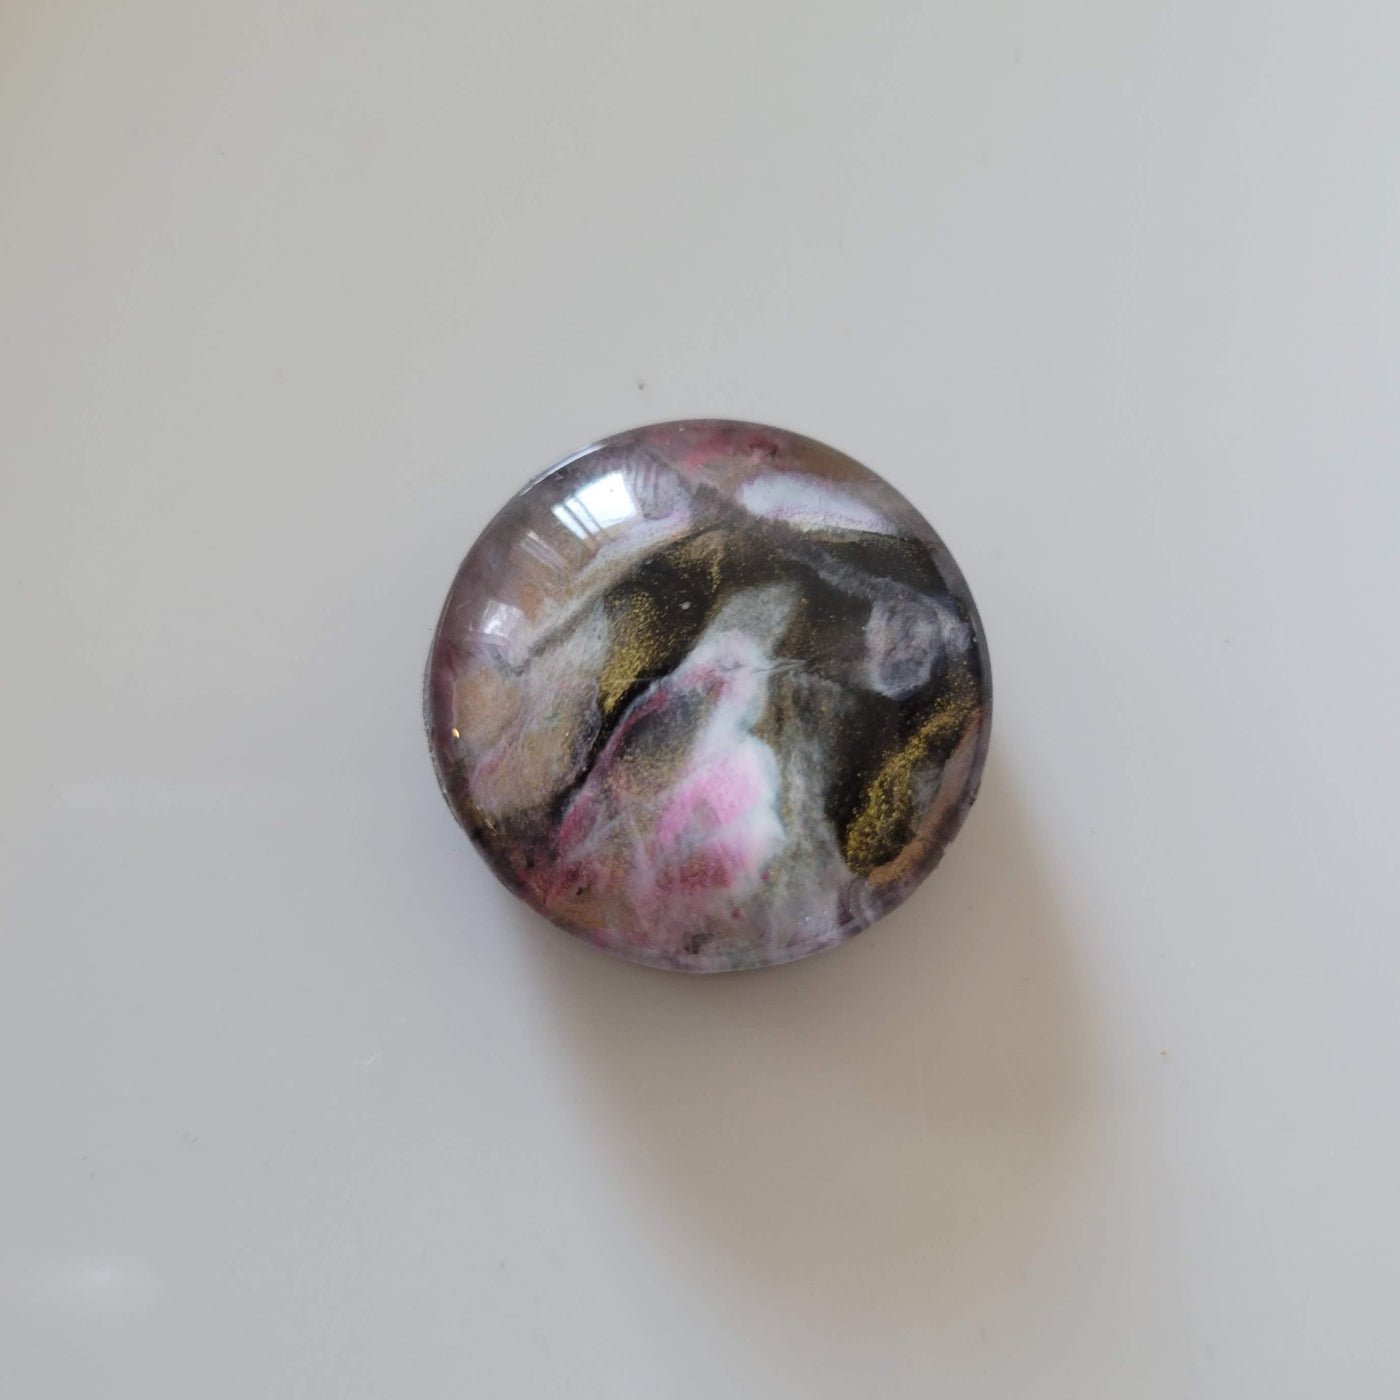 hand-painted circular glass magnet with pink, black, white and gold colors swirled